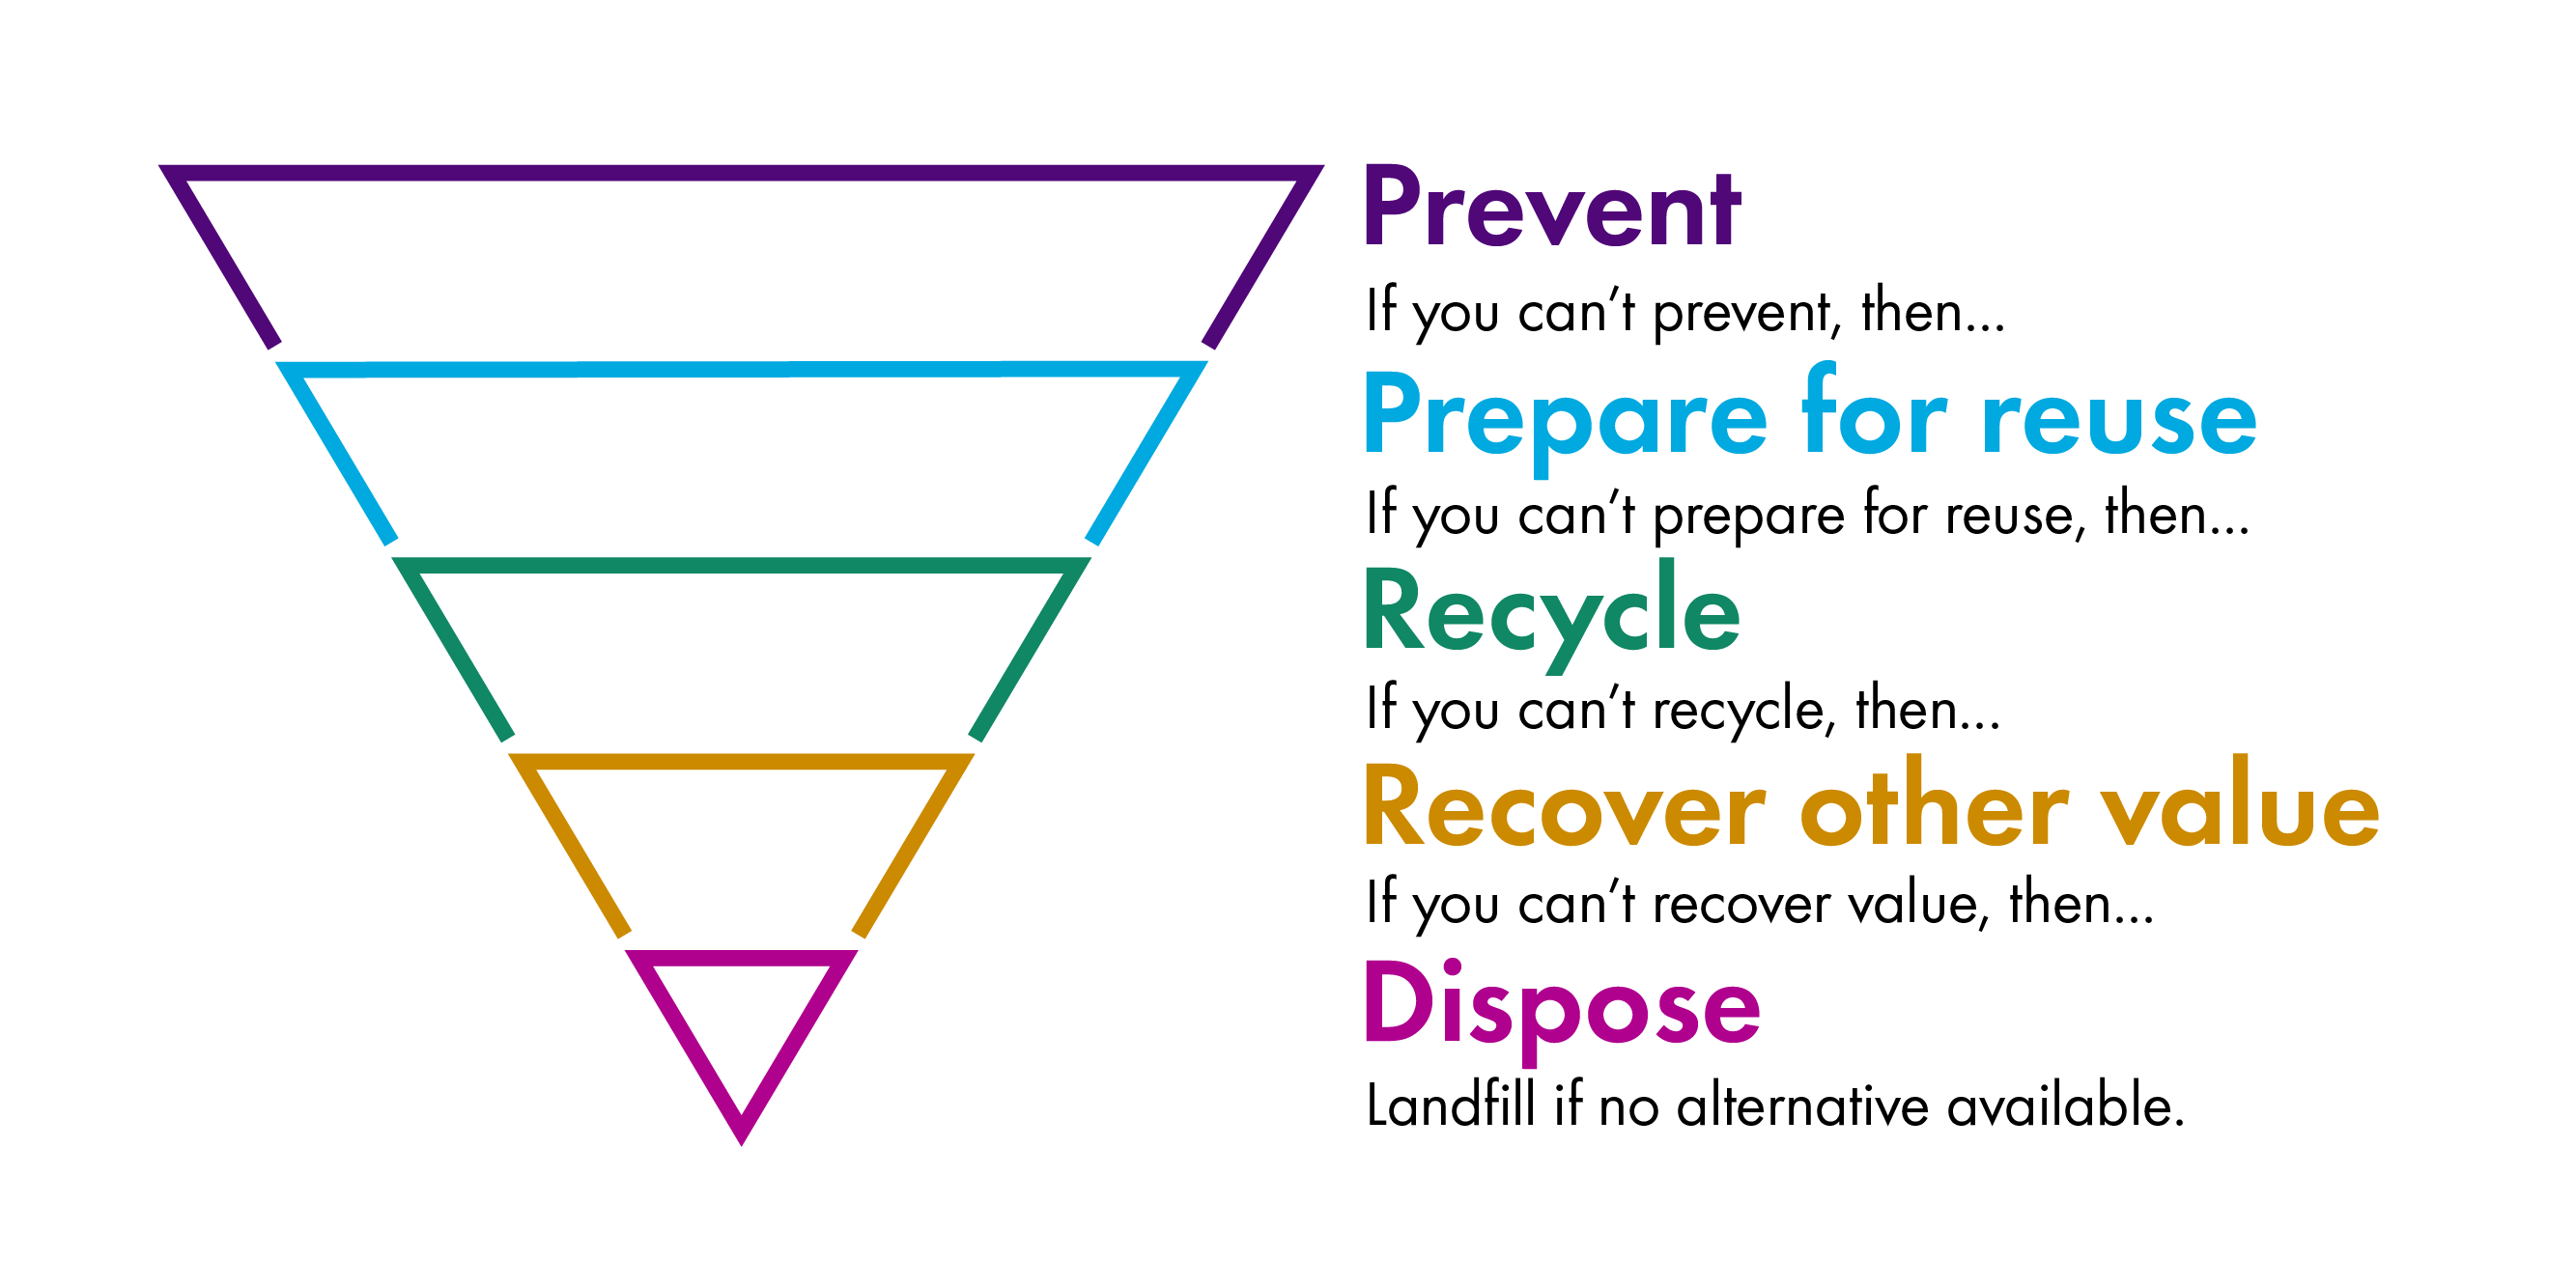 Diagram showing the waste hierarchy. The diagram is an inverted triangle with horizontal lines cutting across to the different stages of the hierarchy with 'prevent' at the top, followed by 'prepare for reuse', 'recycle', 'recover other value' and 'dispose' in descending order.